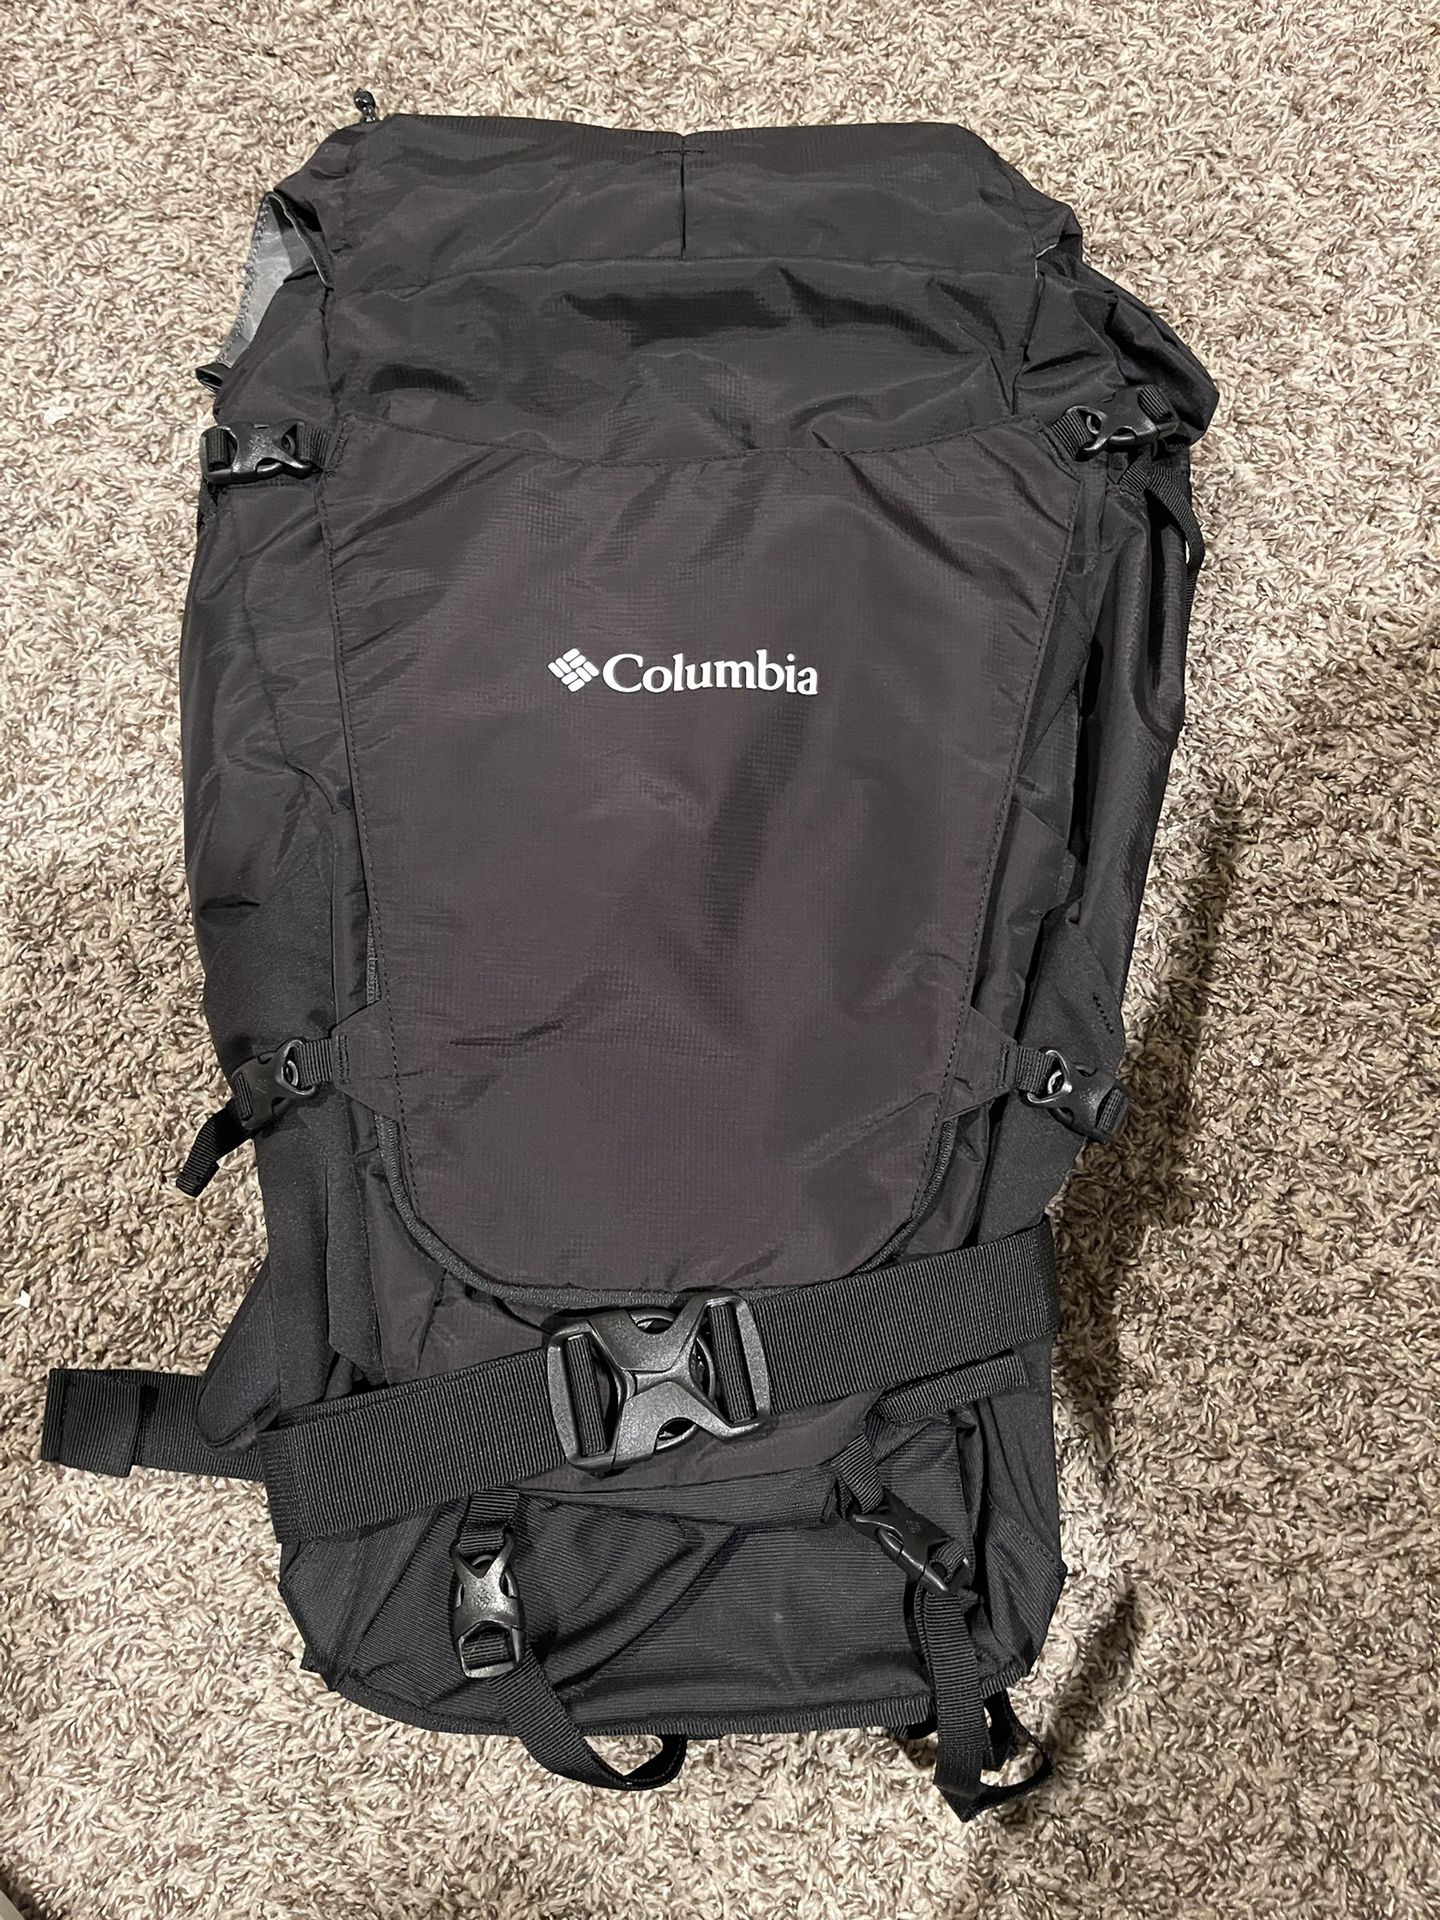 Columbia Remote access 60L backpack